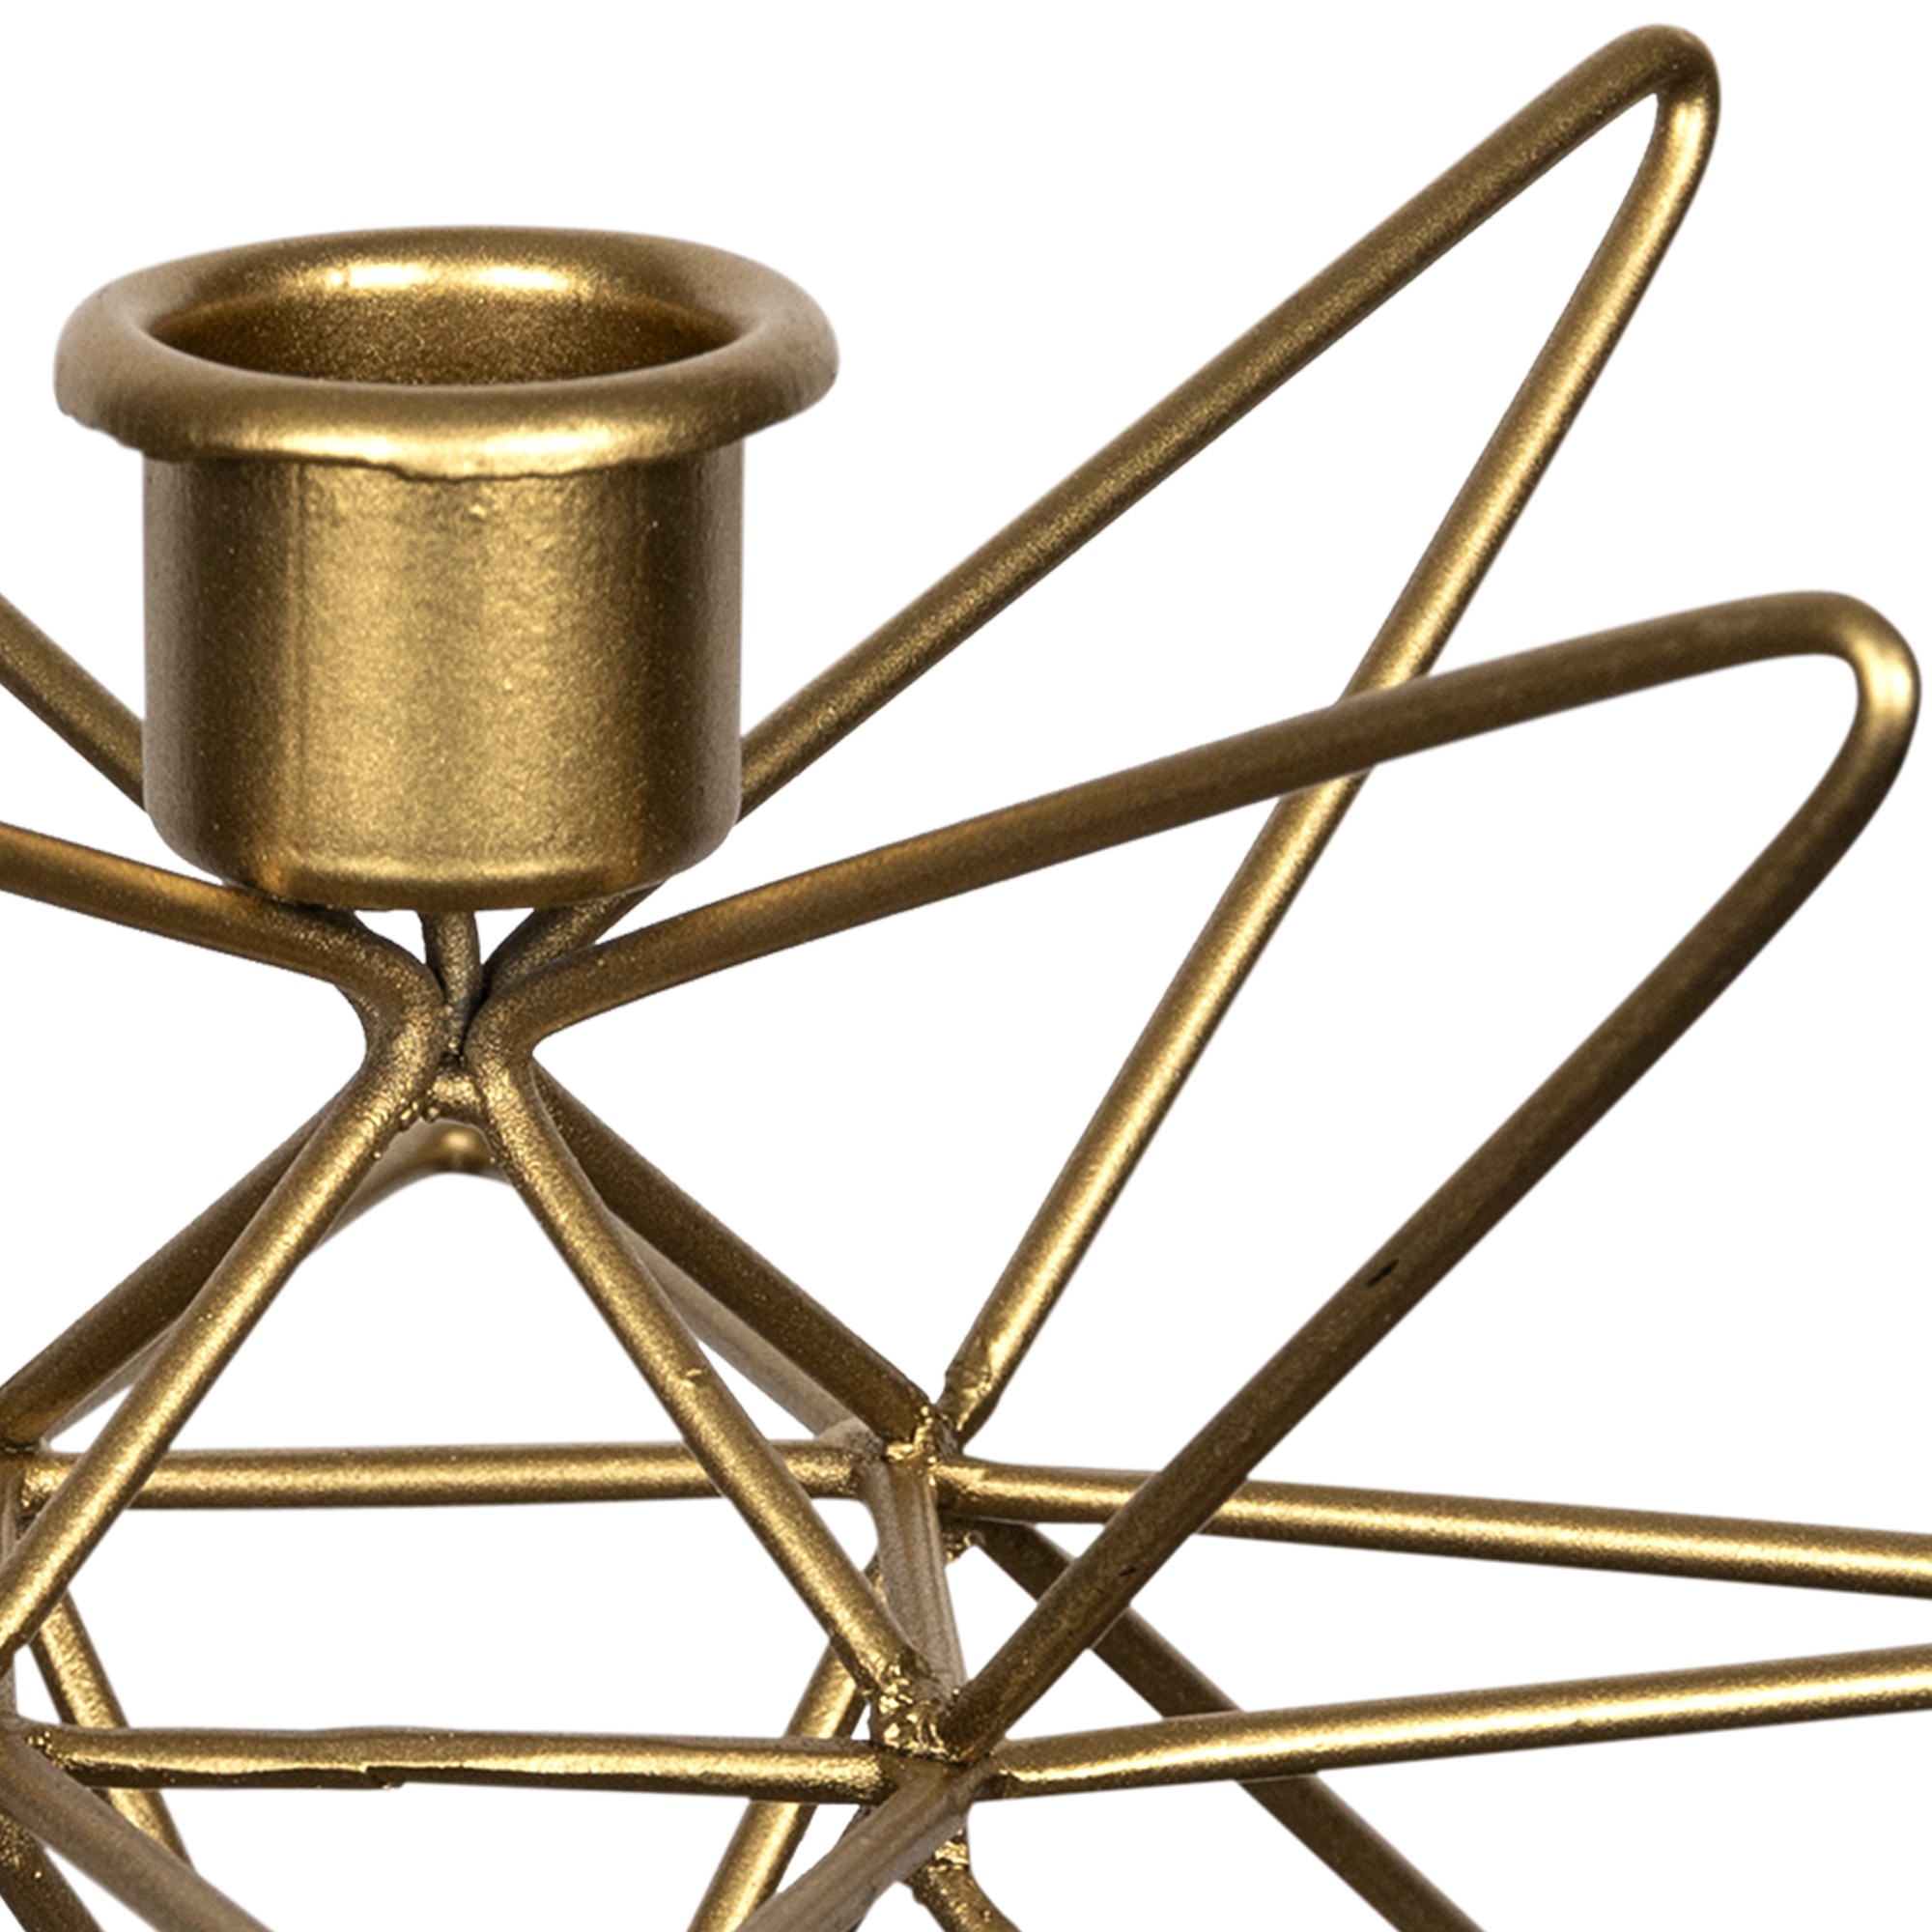 Shiny Gold 3D Wire Star Taper Candle Holder